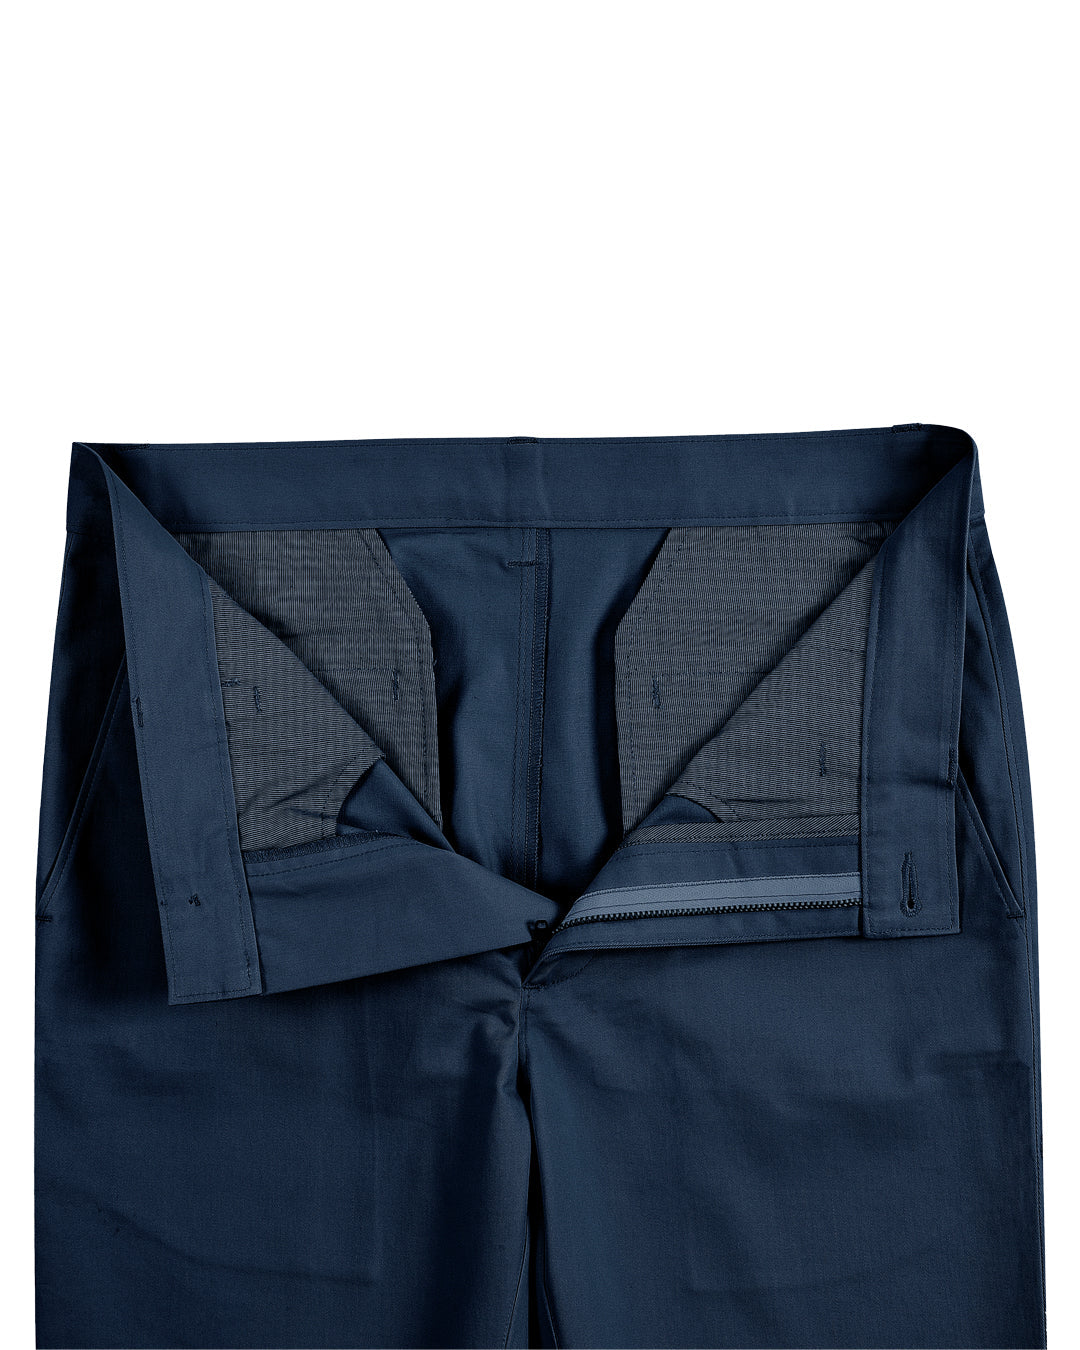 Front open view of custom Genoa Chino pants for men by Luxire in ink blue